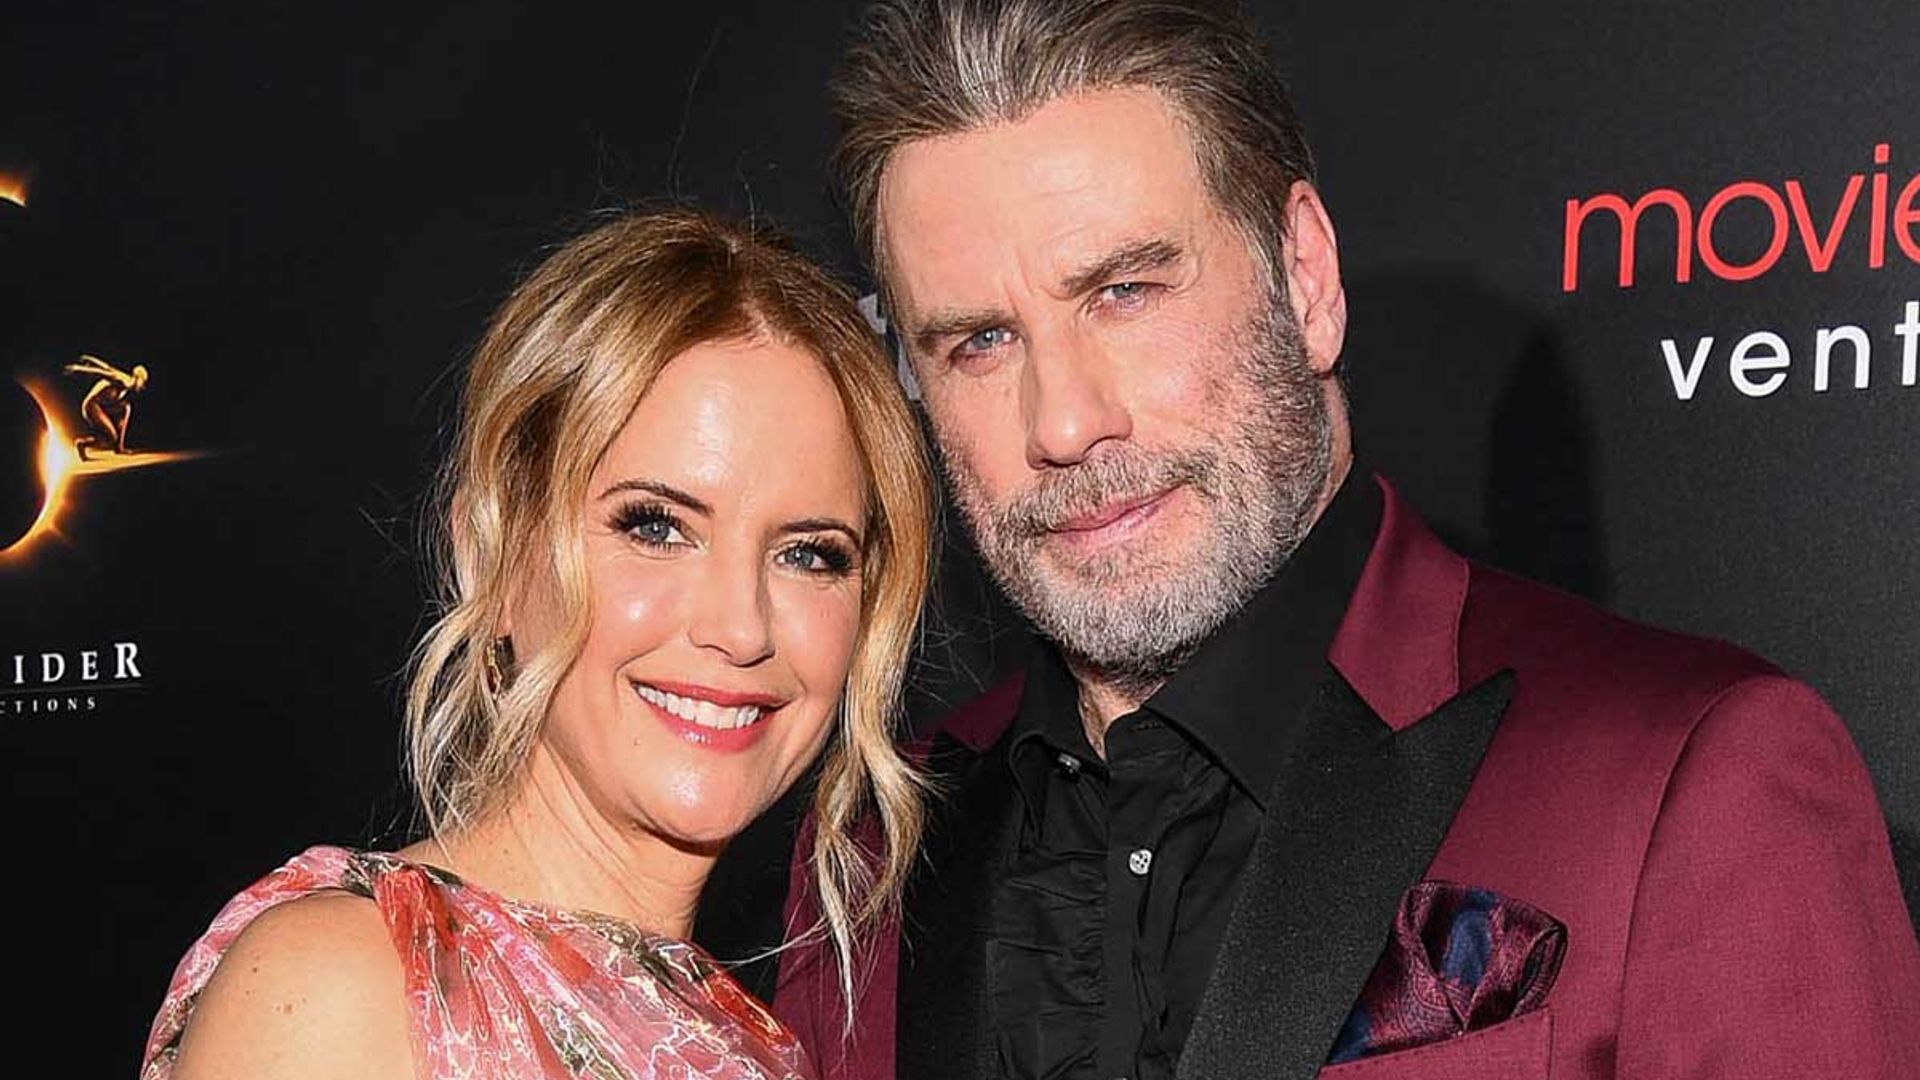 John Travolta expresses his heartbreaking experience with grief after losing wife Kelly Preston